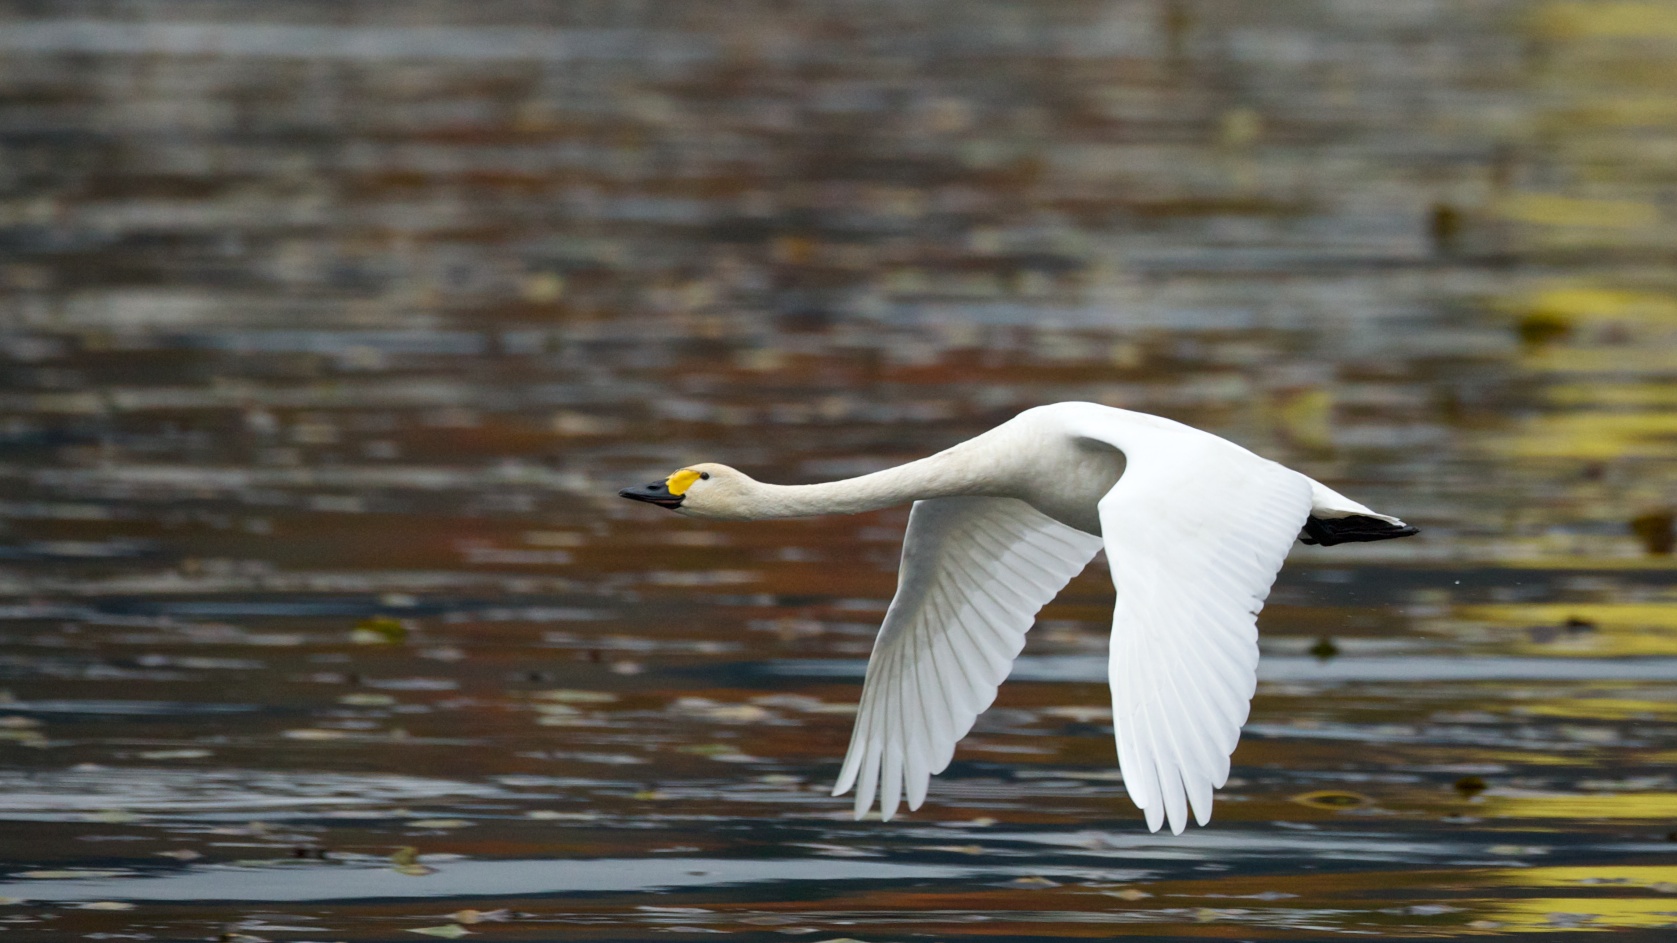 Tundra Swan Backgrounds, Compatible - PC, Mobile, Gadgets| 1677x943 px